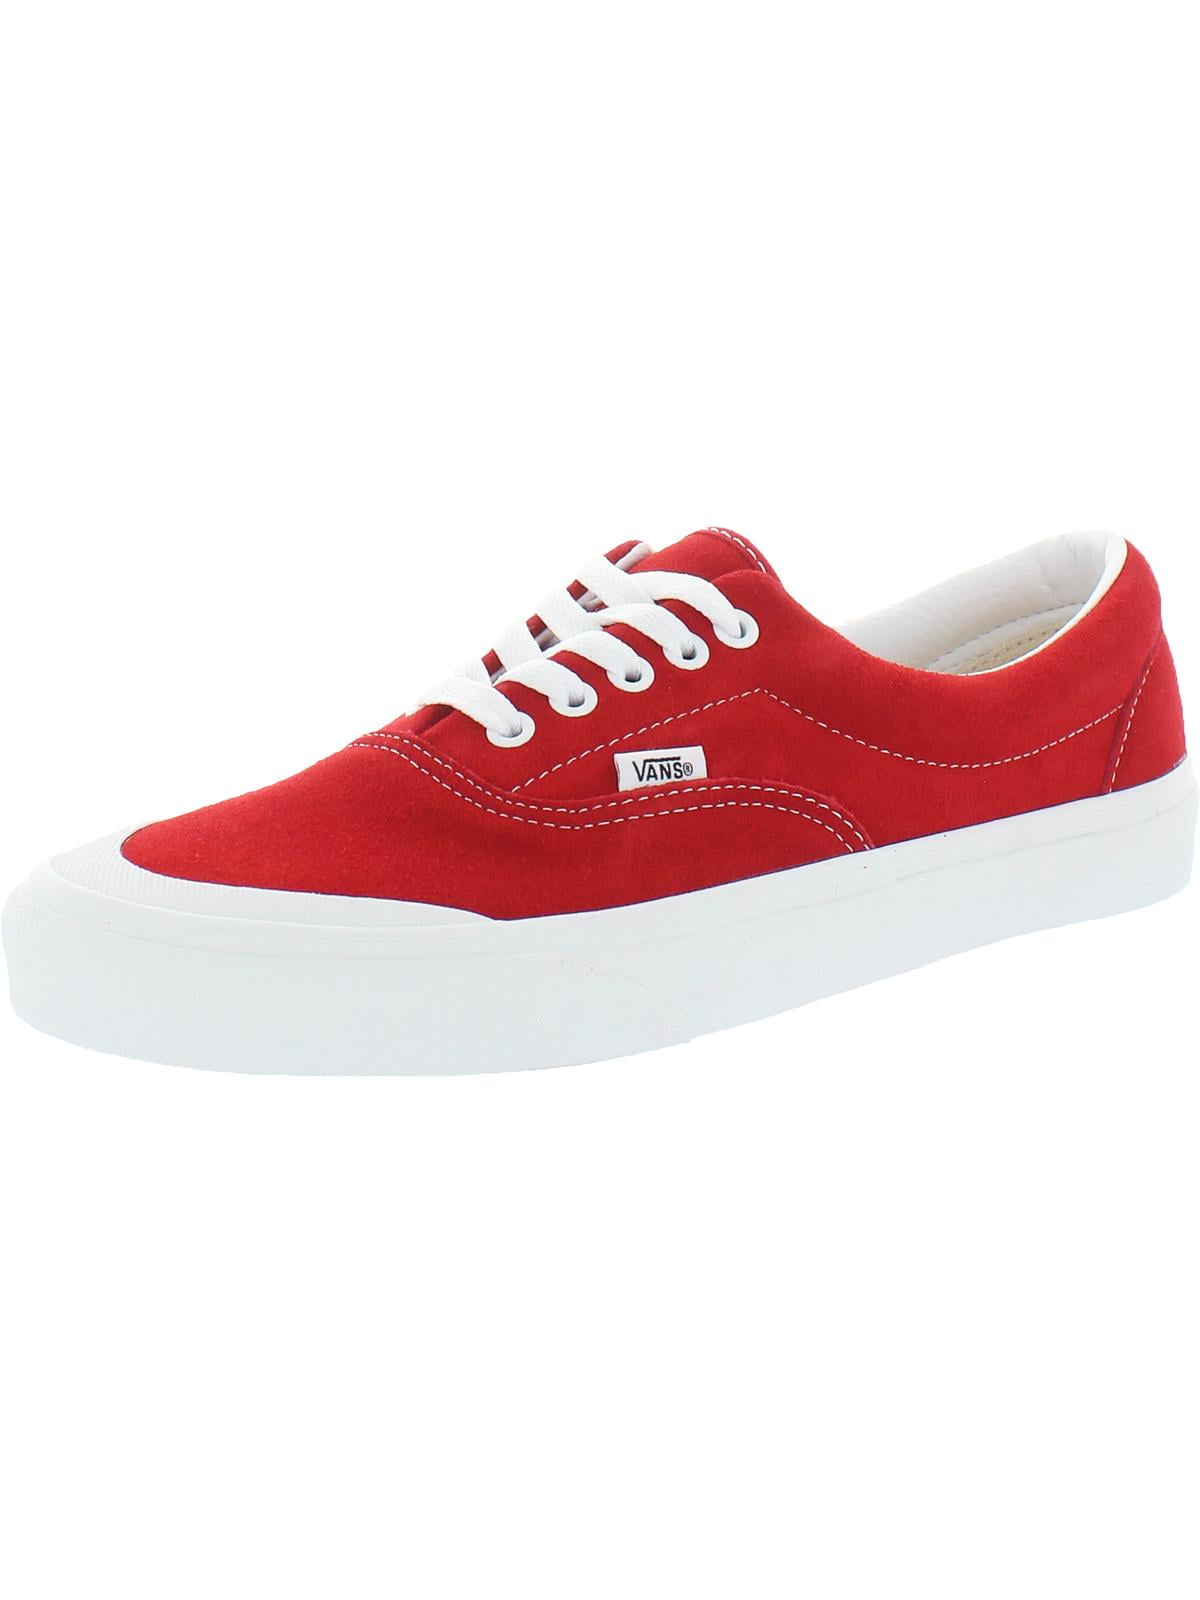 all red vans size 9